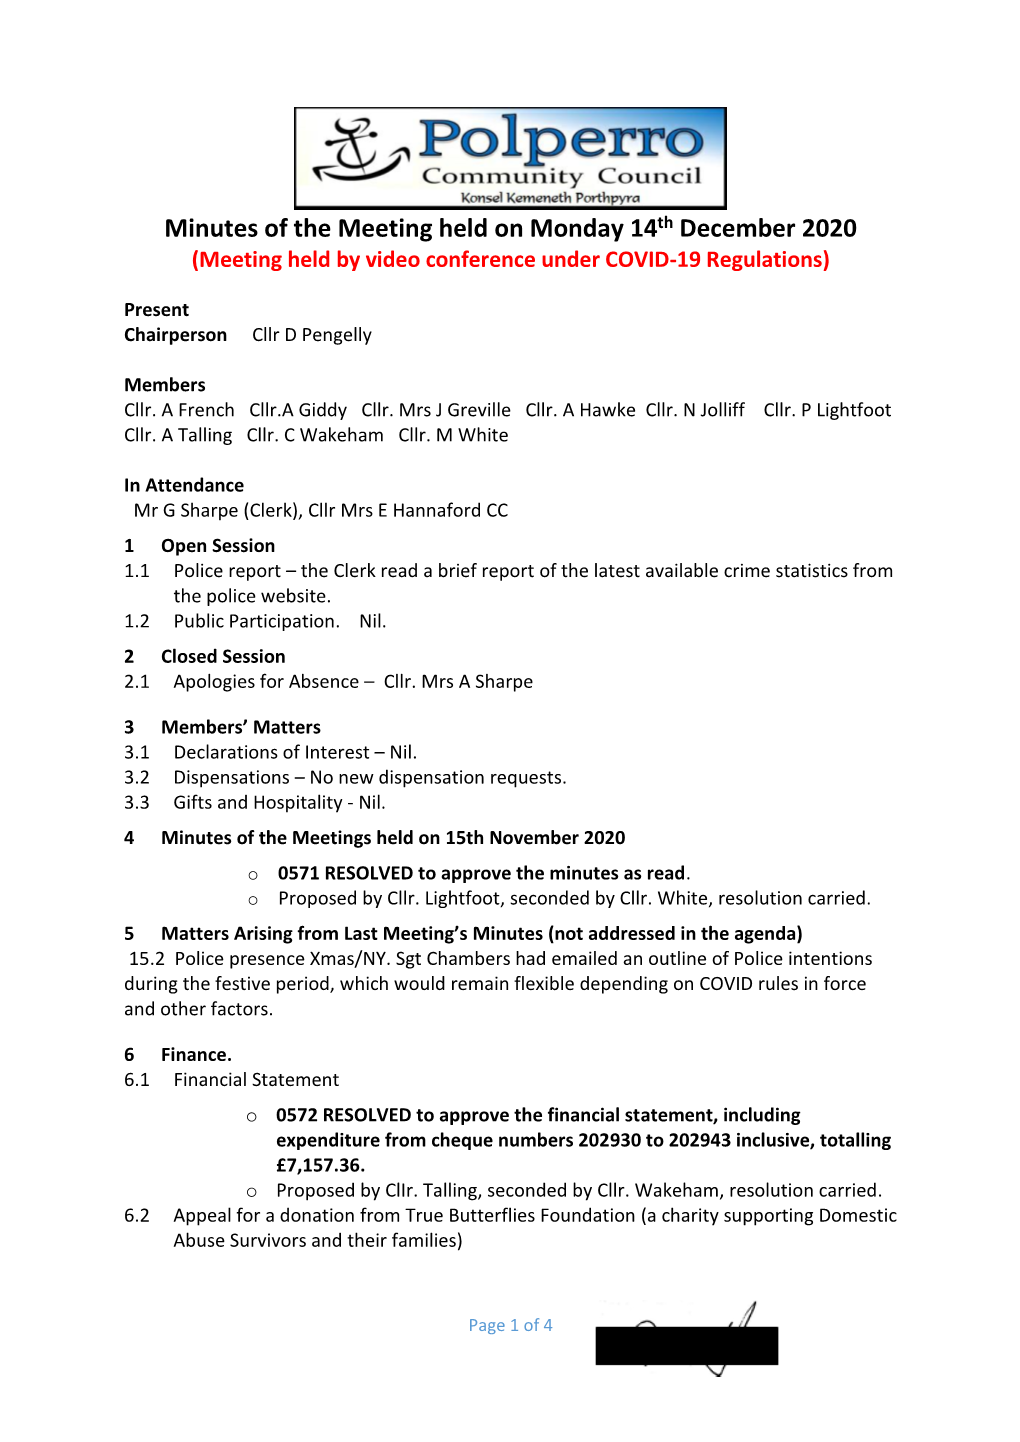 Minutes of the Meeting Held on Monday 14Th December 2020 (Meeting Held by Video Conference Under COVID-19 Regulations)